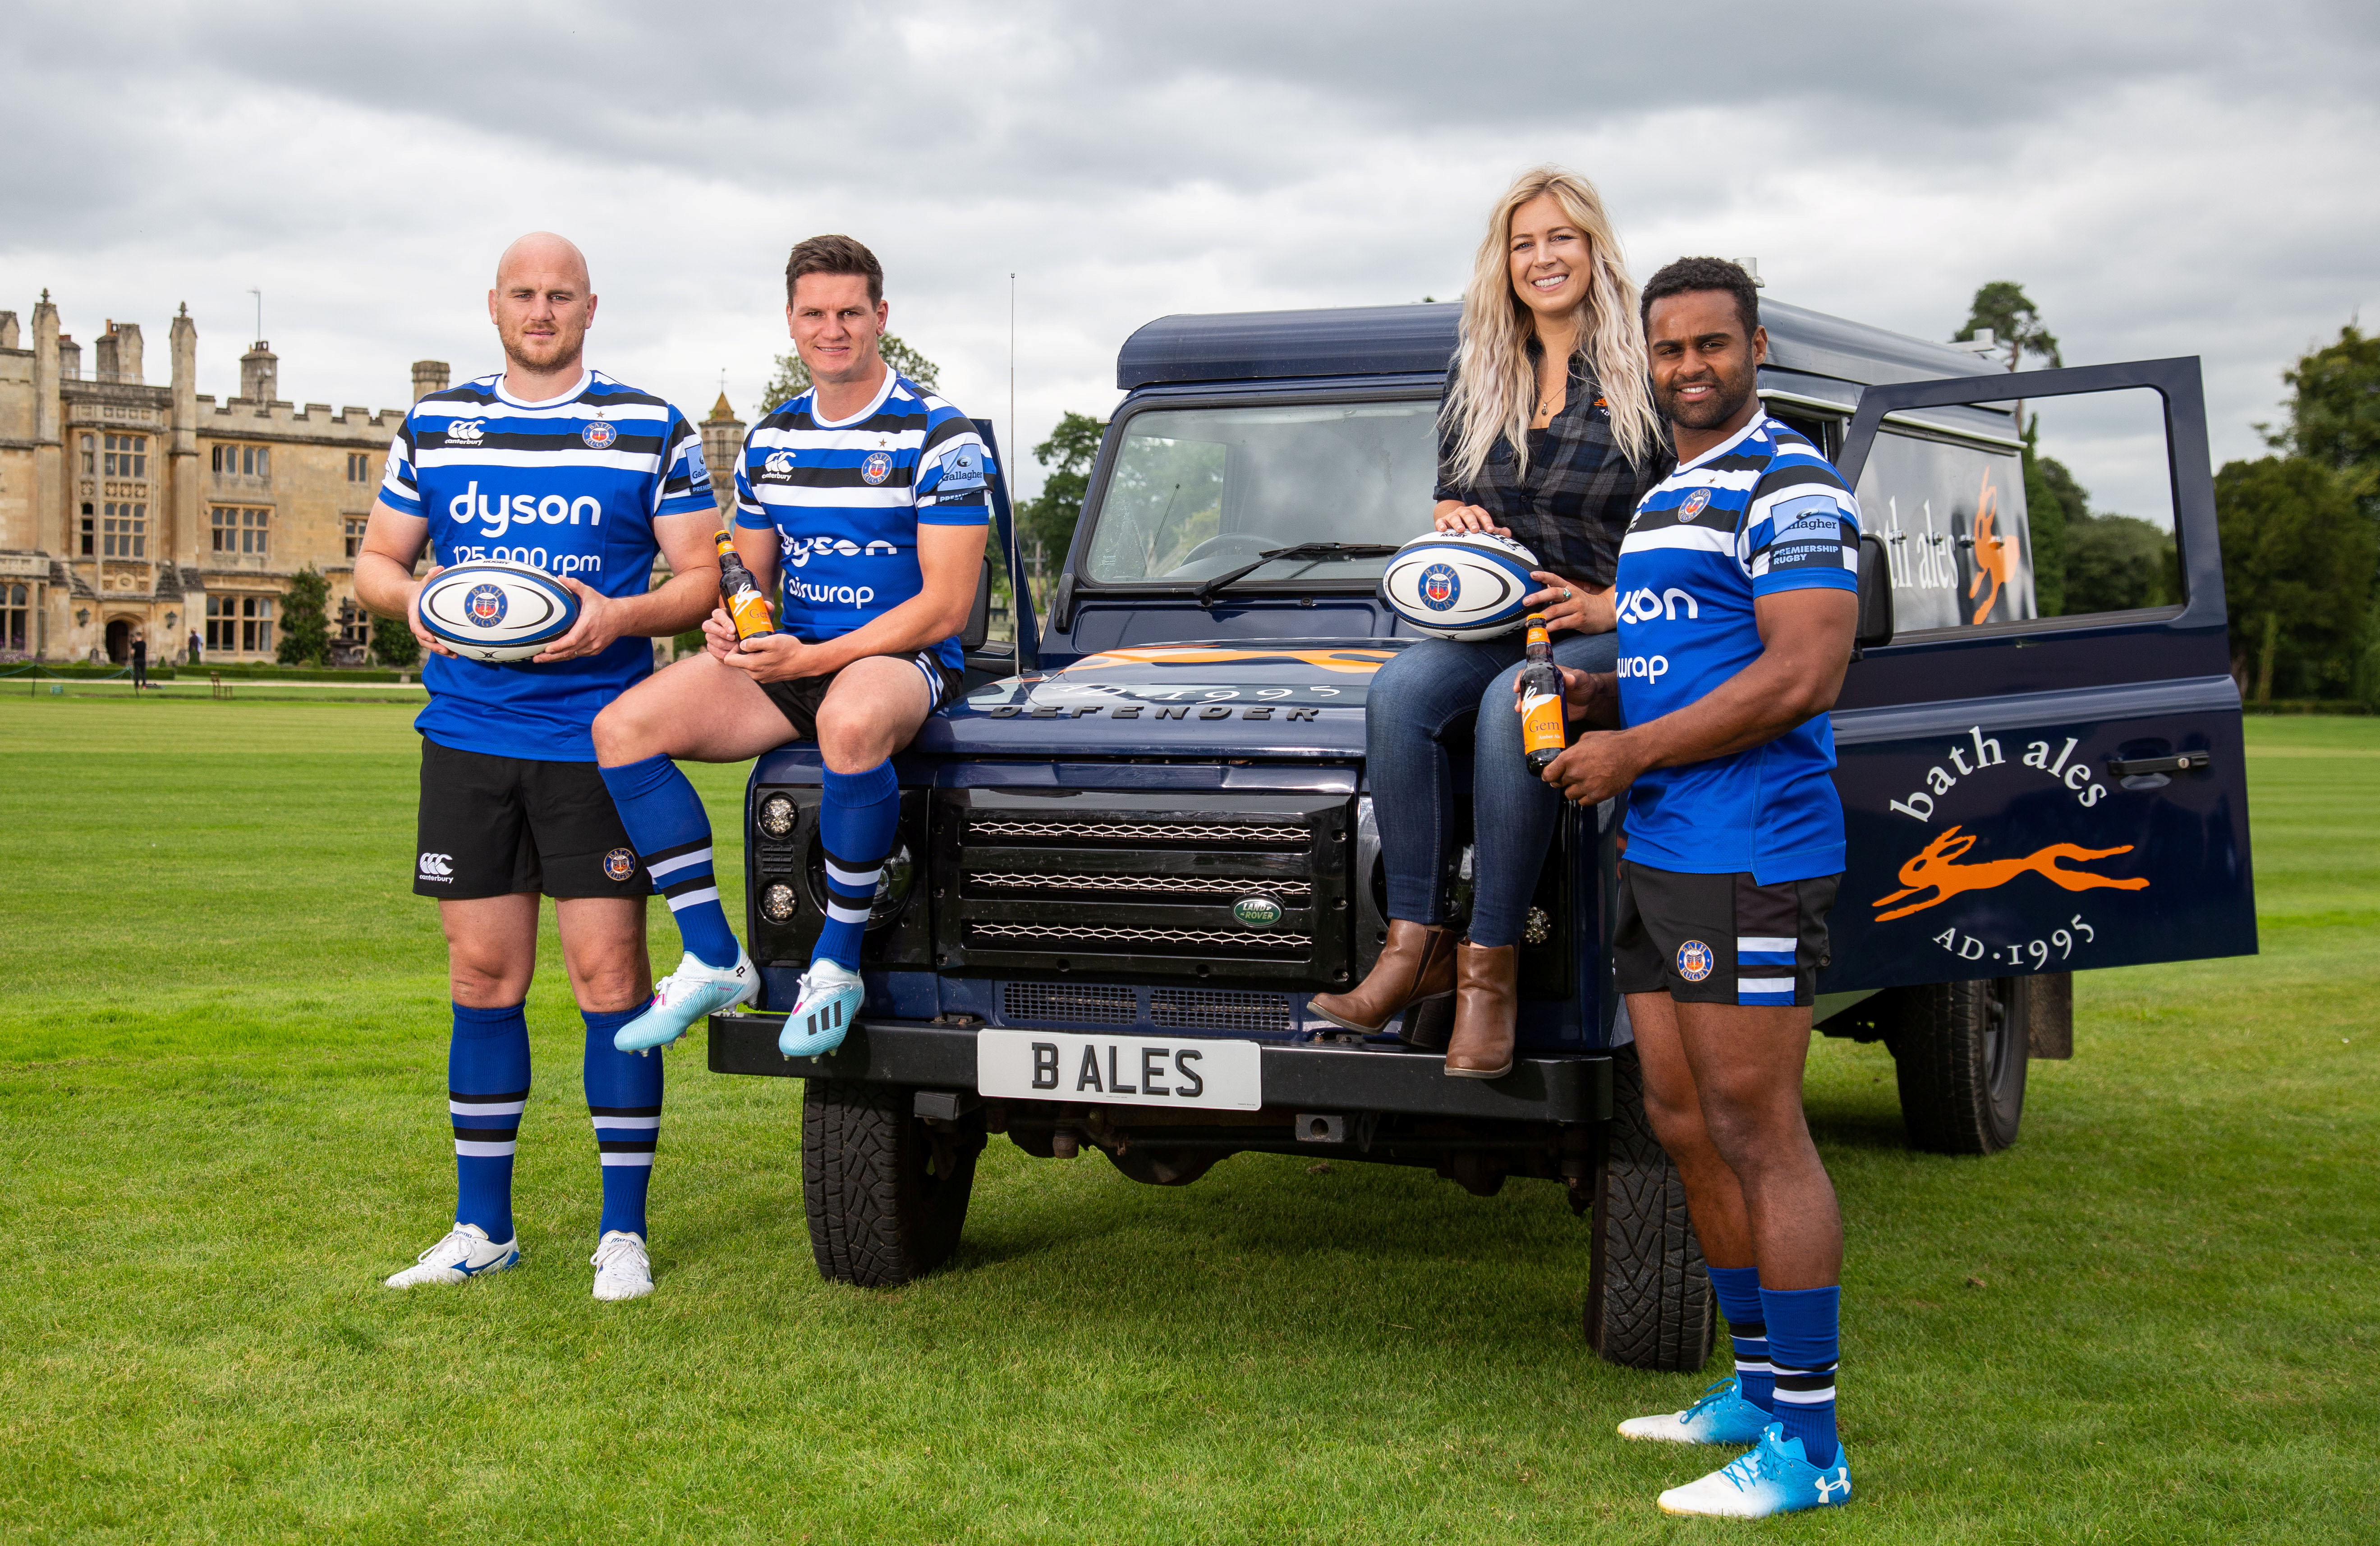 St Austell Brewery - Bath Rugby players Matt Garvey (left), Freddie Burns (centre) and Aled Brew with Vicky Guy, Bath Ales Marketing Manager and the Bath Ales Land Rover to celebrate the renewed sponsorship of the club. Bath, Somerset. August 22 2019.